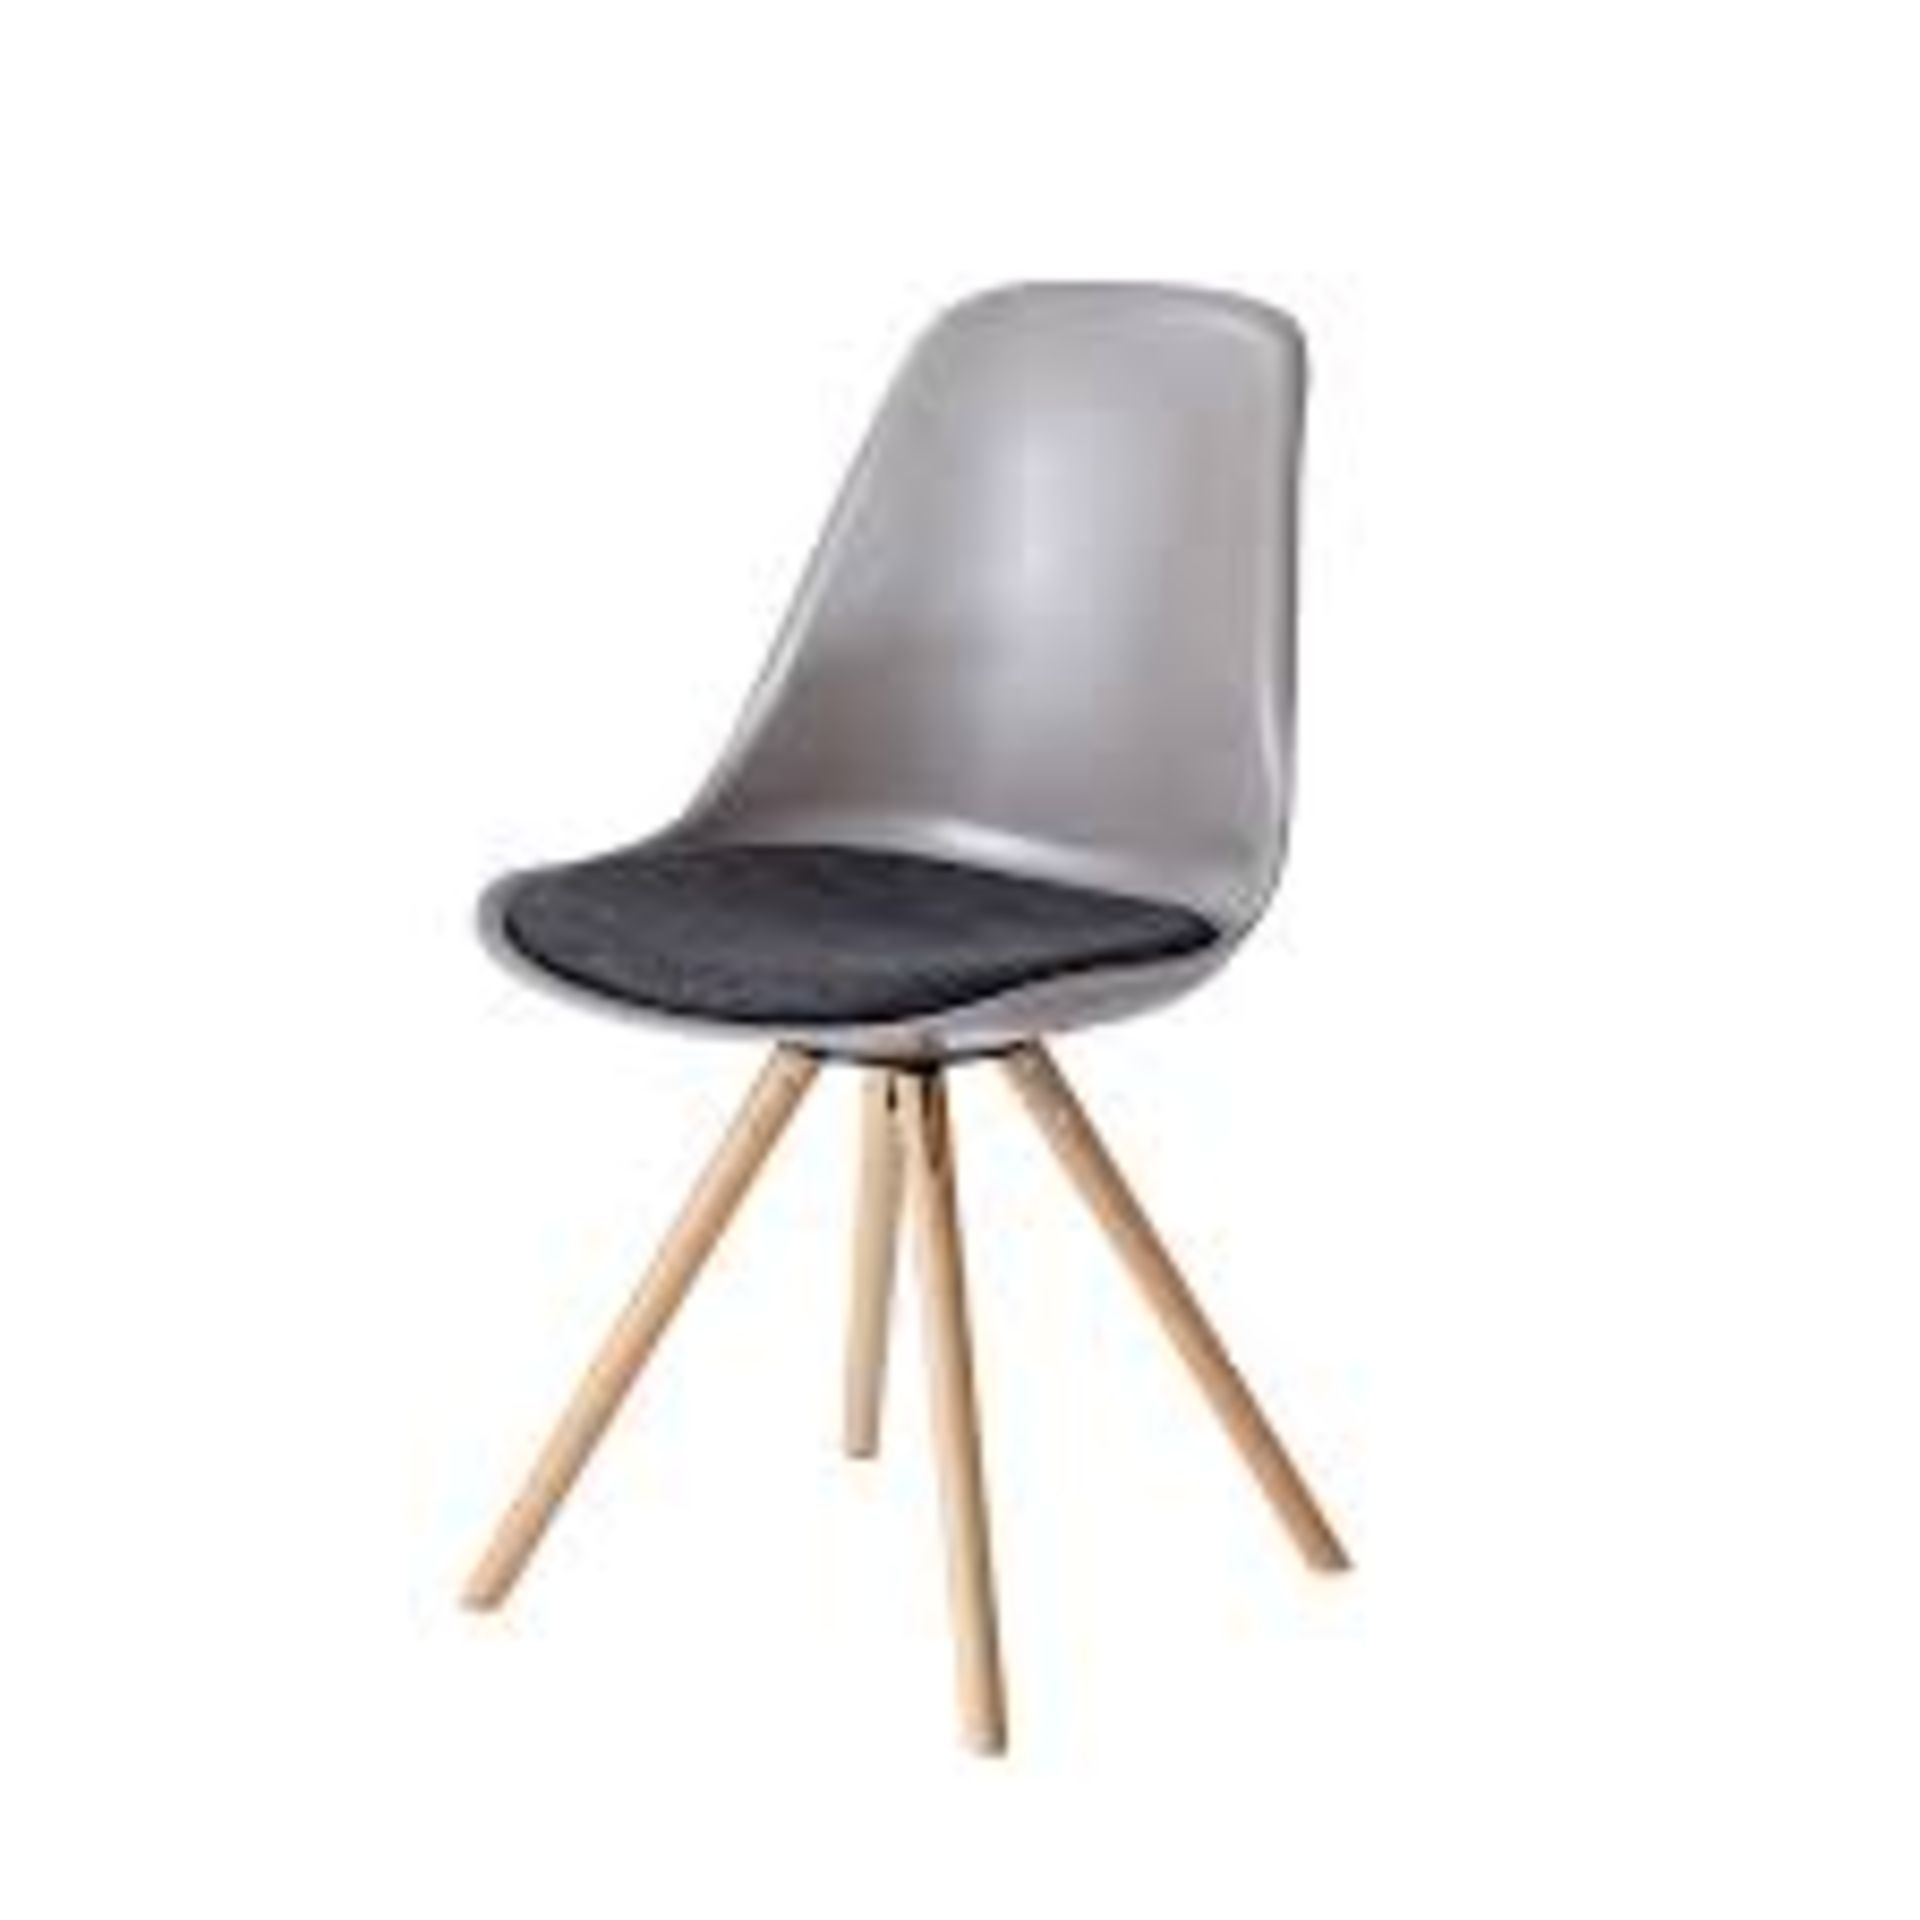 Set of 4 x 'TURNER' Contemporary Scandinavian-style Dining Chairs in Brown With Grey Seat Pads - Mid - Image 3 of 4